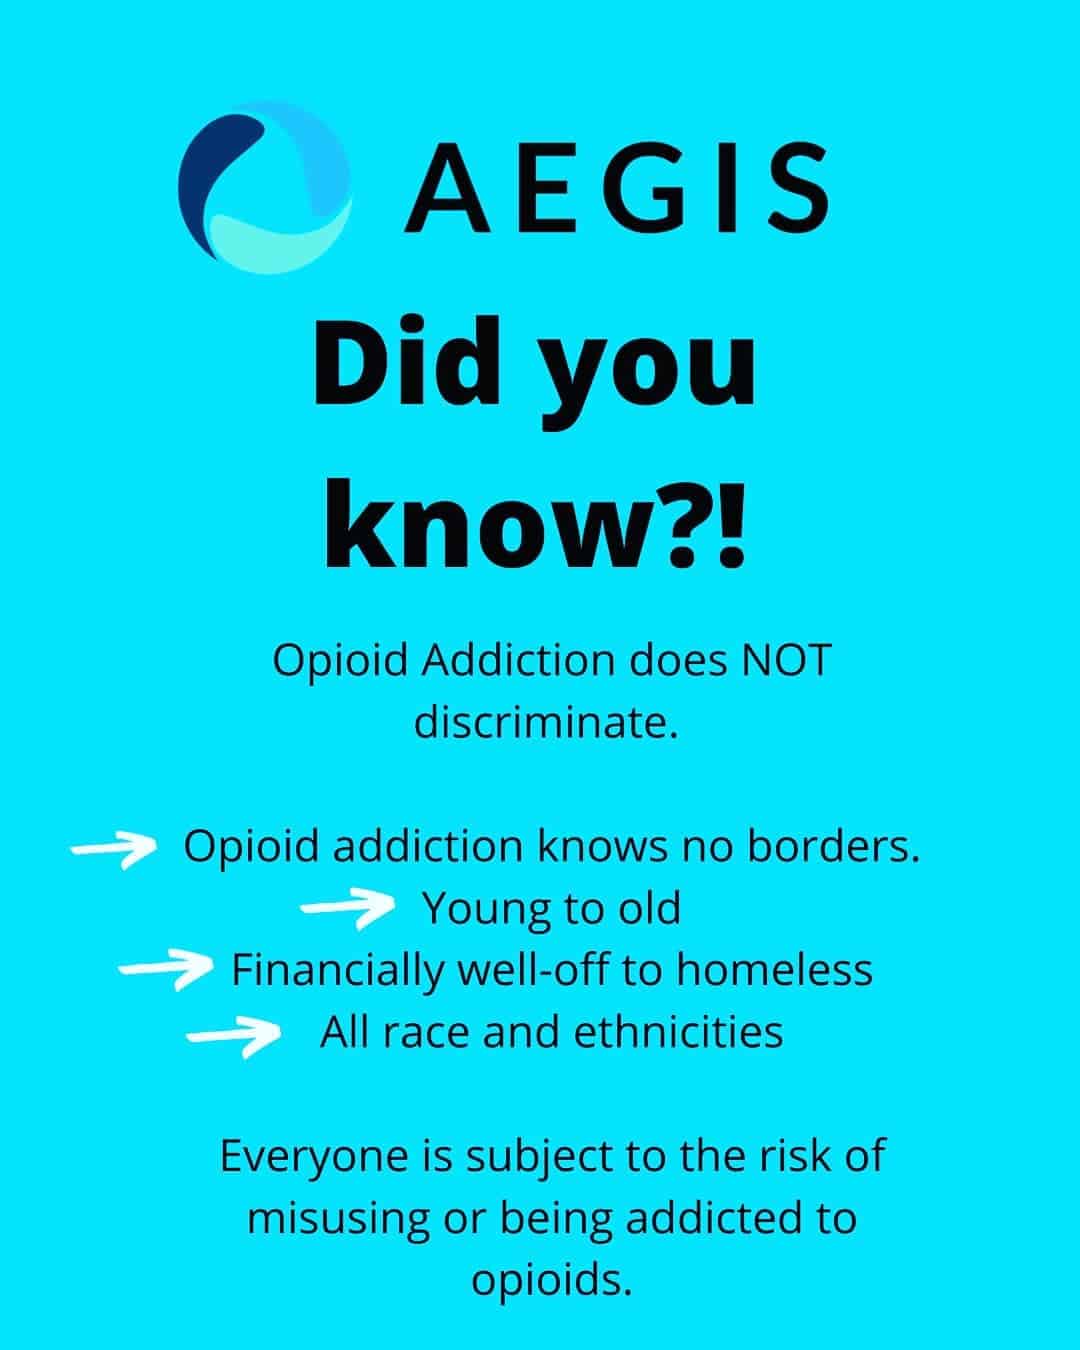 Facts about opioid addiction in Michigan